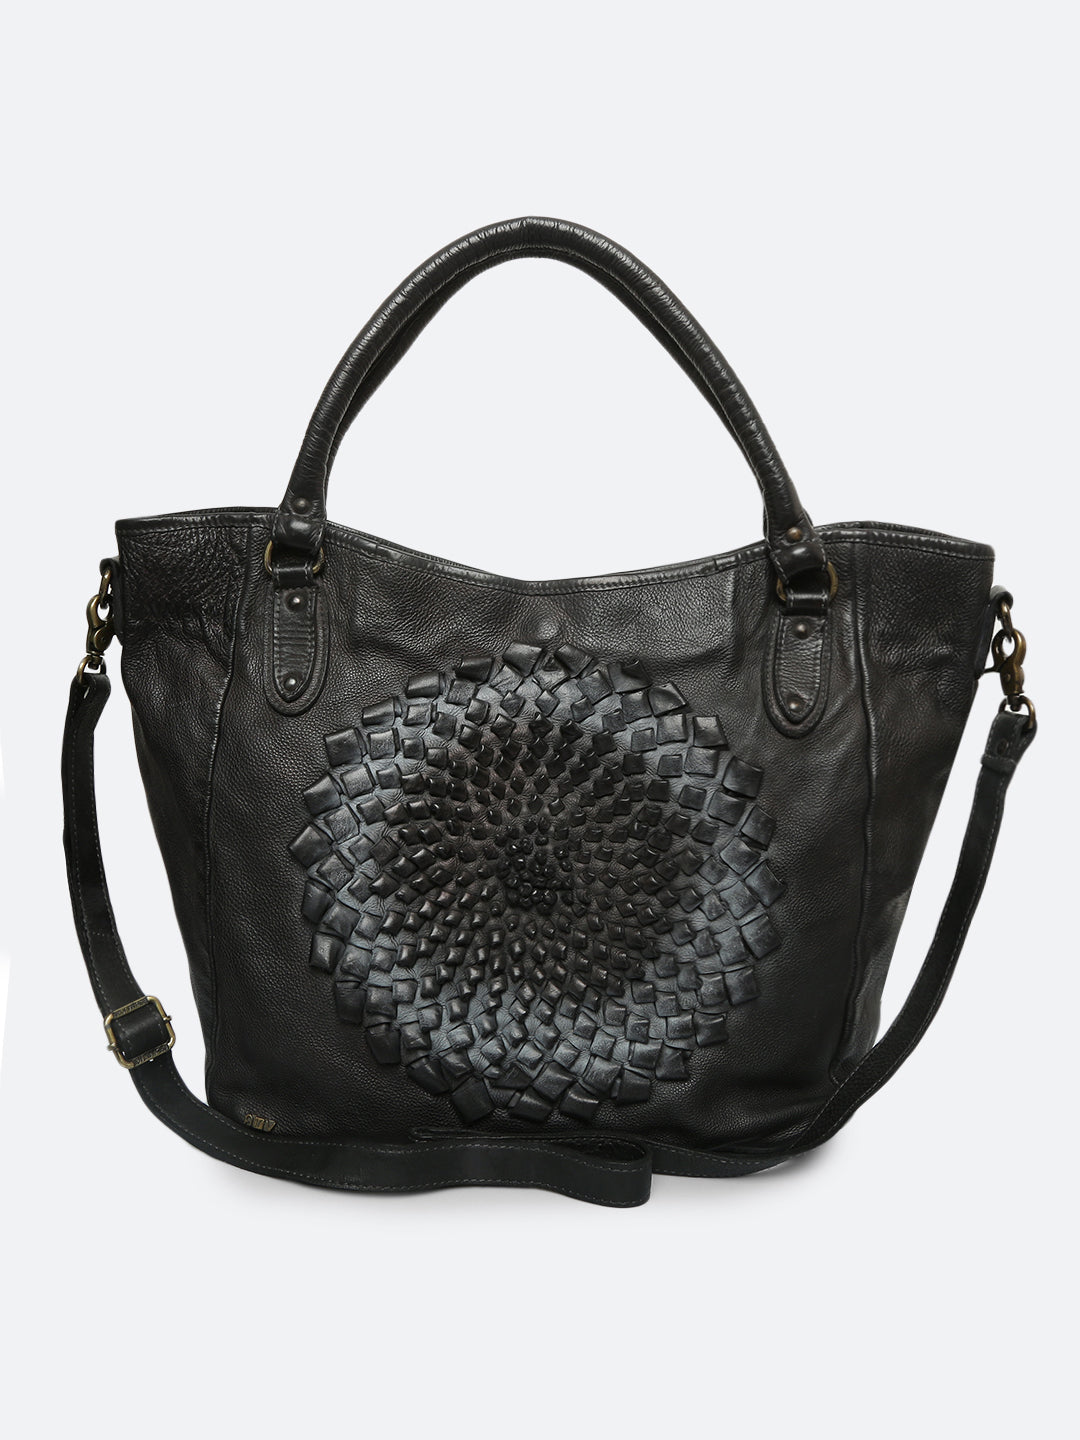 Genuine Black Leather Tote Bag With 3D Flower